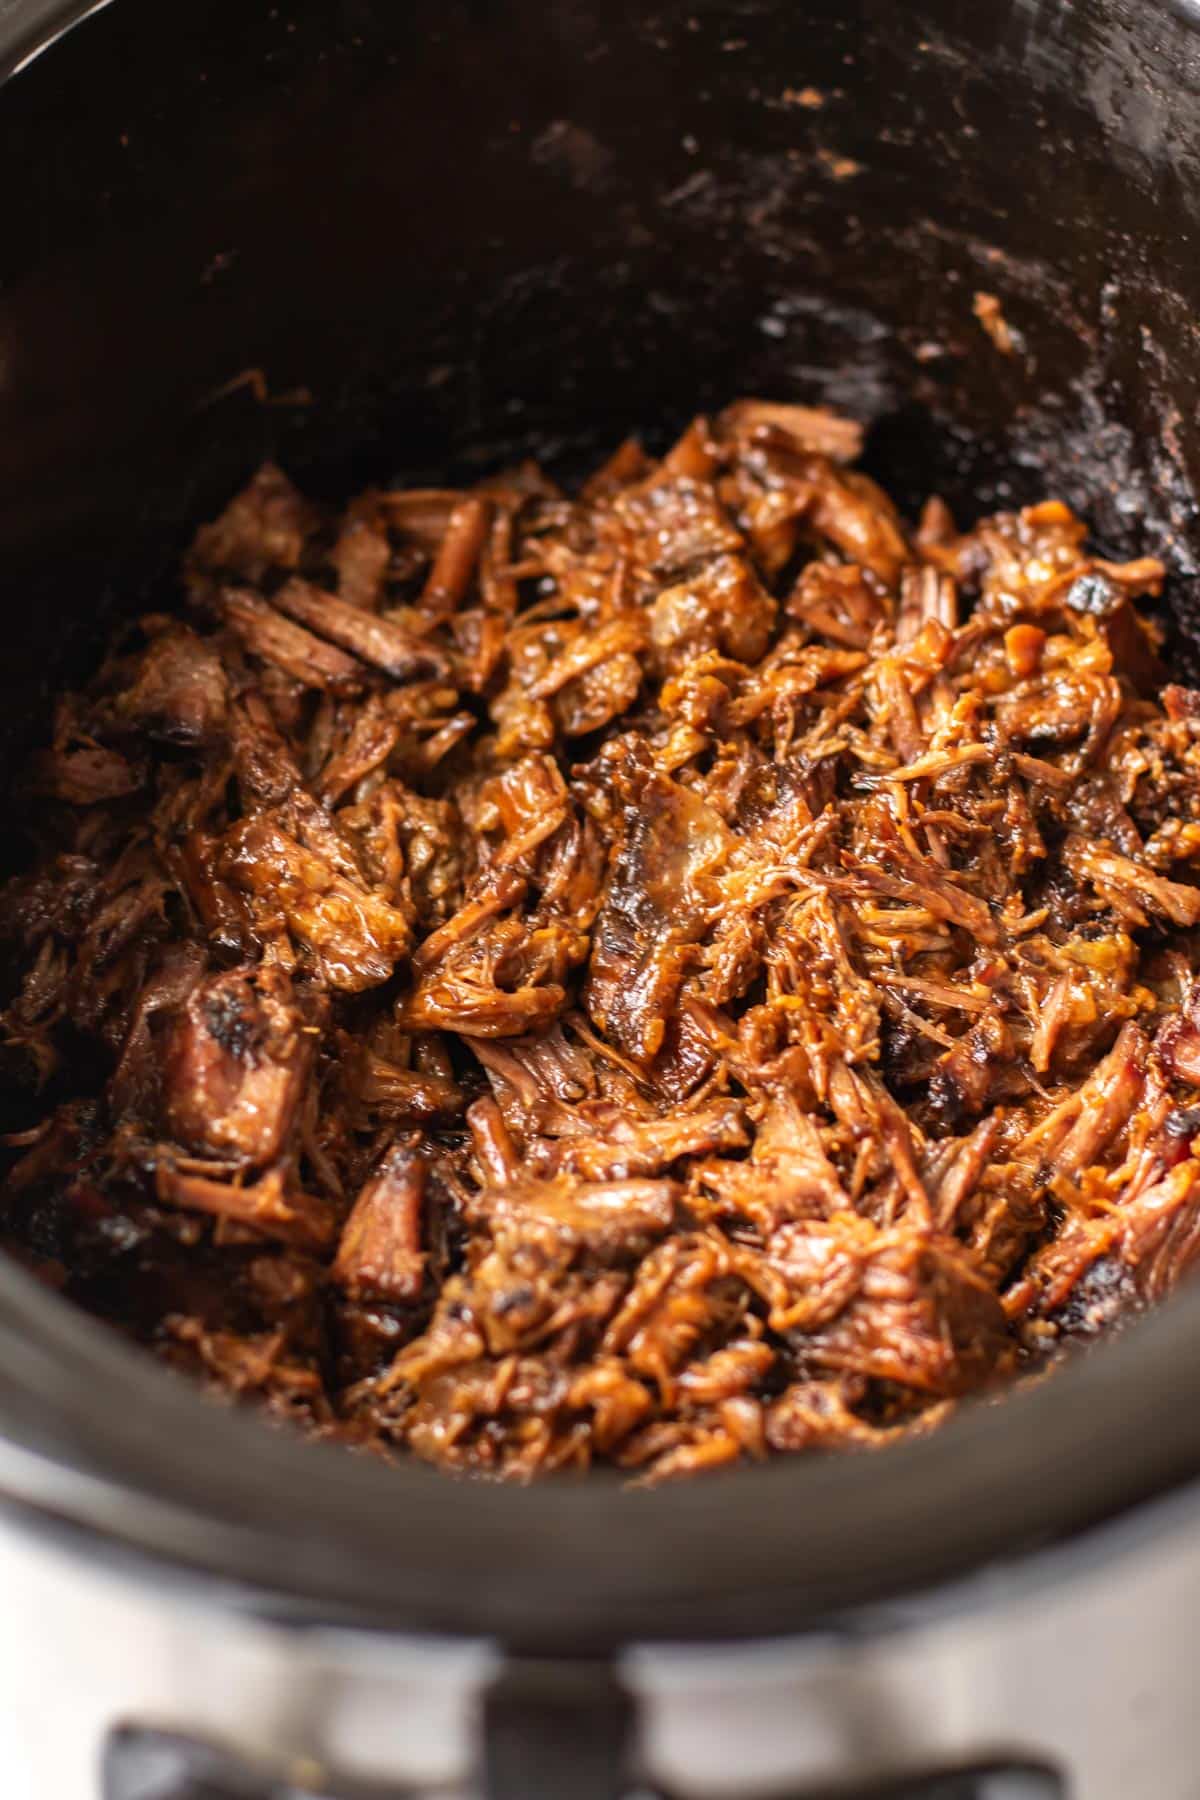 bbq beef in a slow cooker.